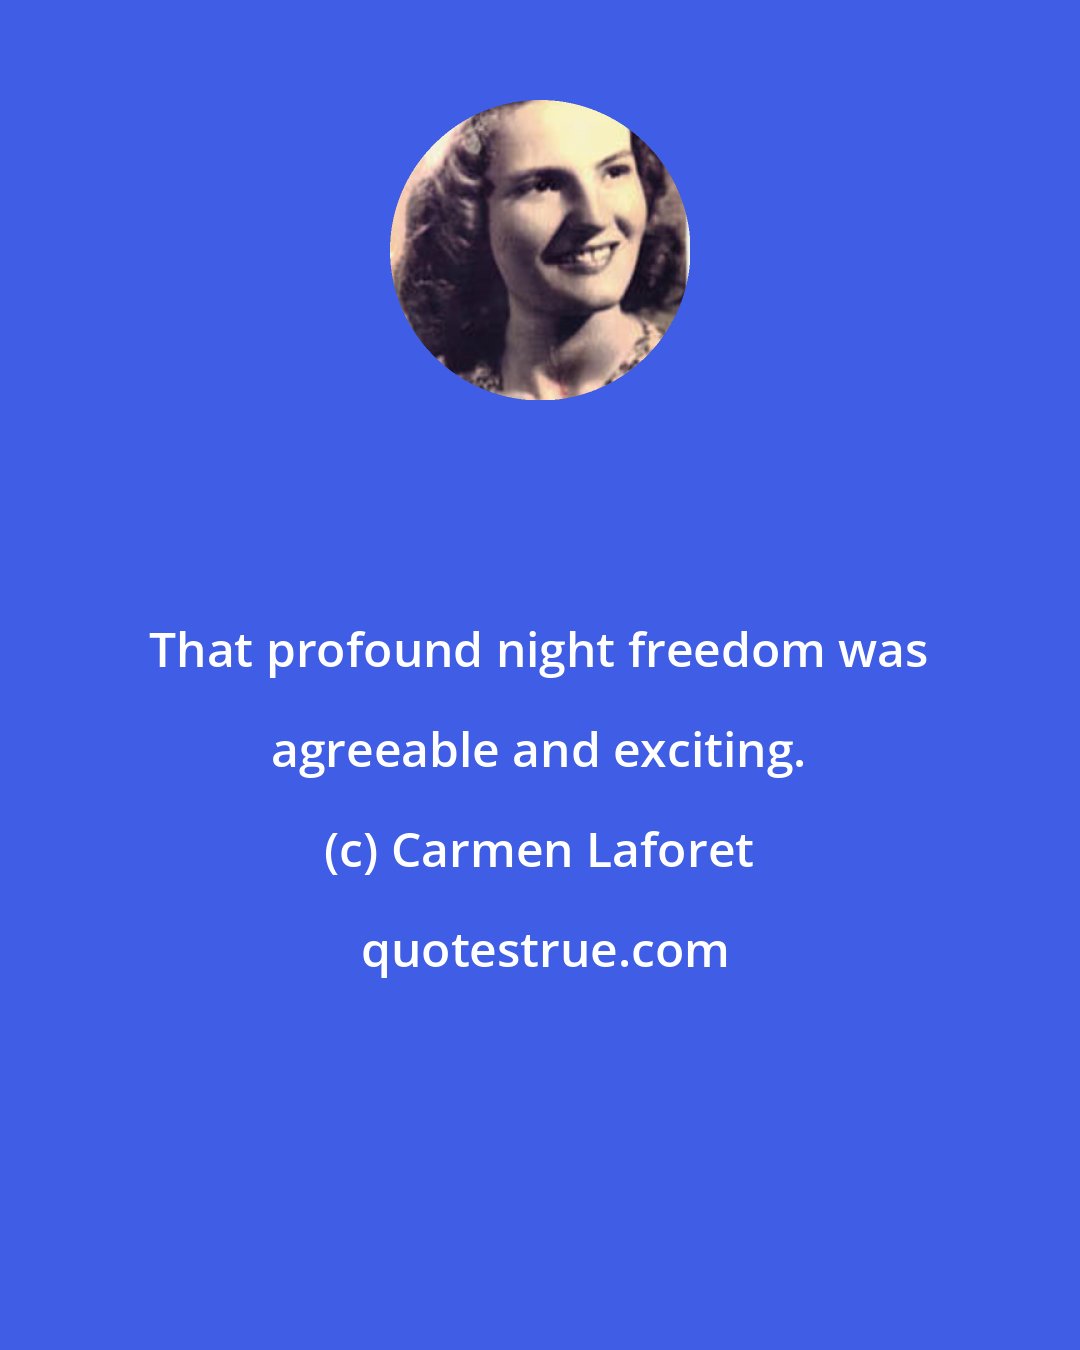 Carmen Laforet: That profound night freedom was agreeable and exciting.